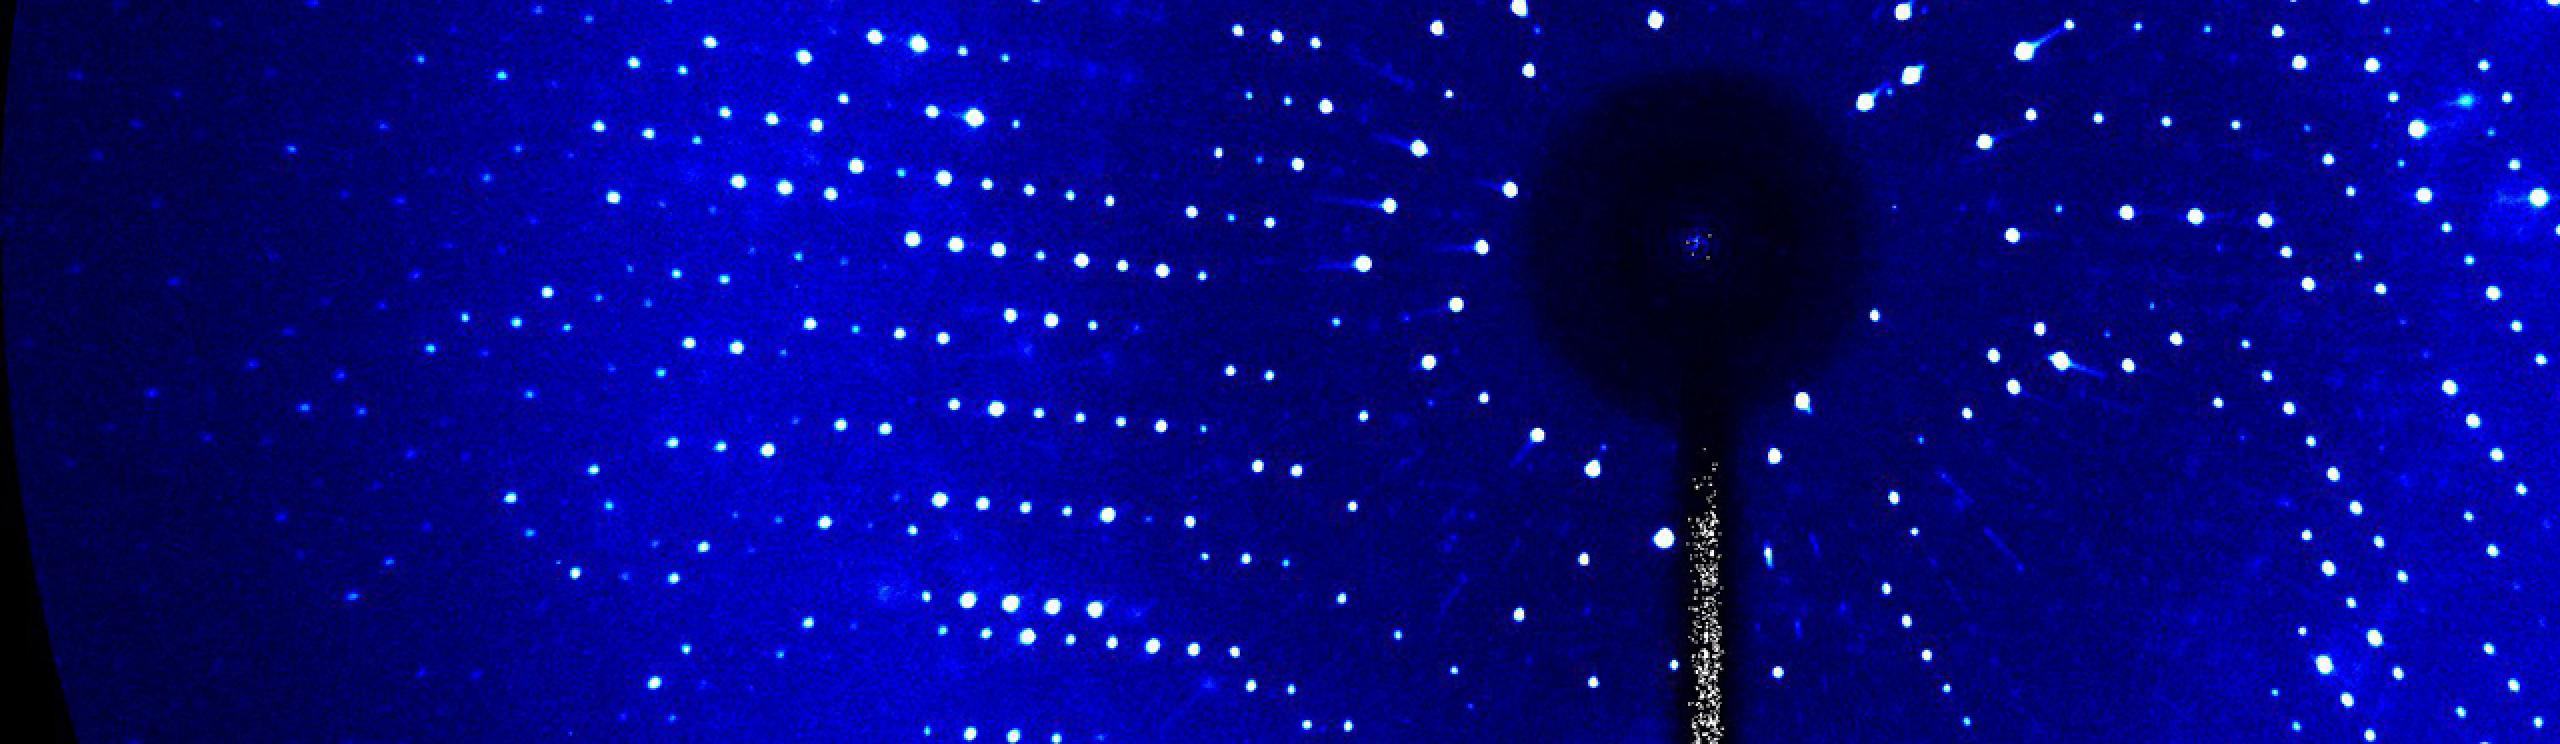 X-ray diffraction pattern of the enzyme glutamate. Credit: Patrick Baker (CC BY 4.0)